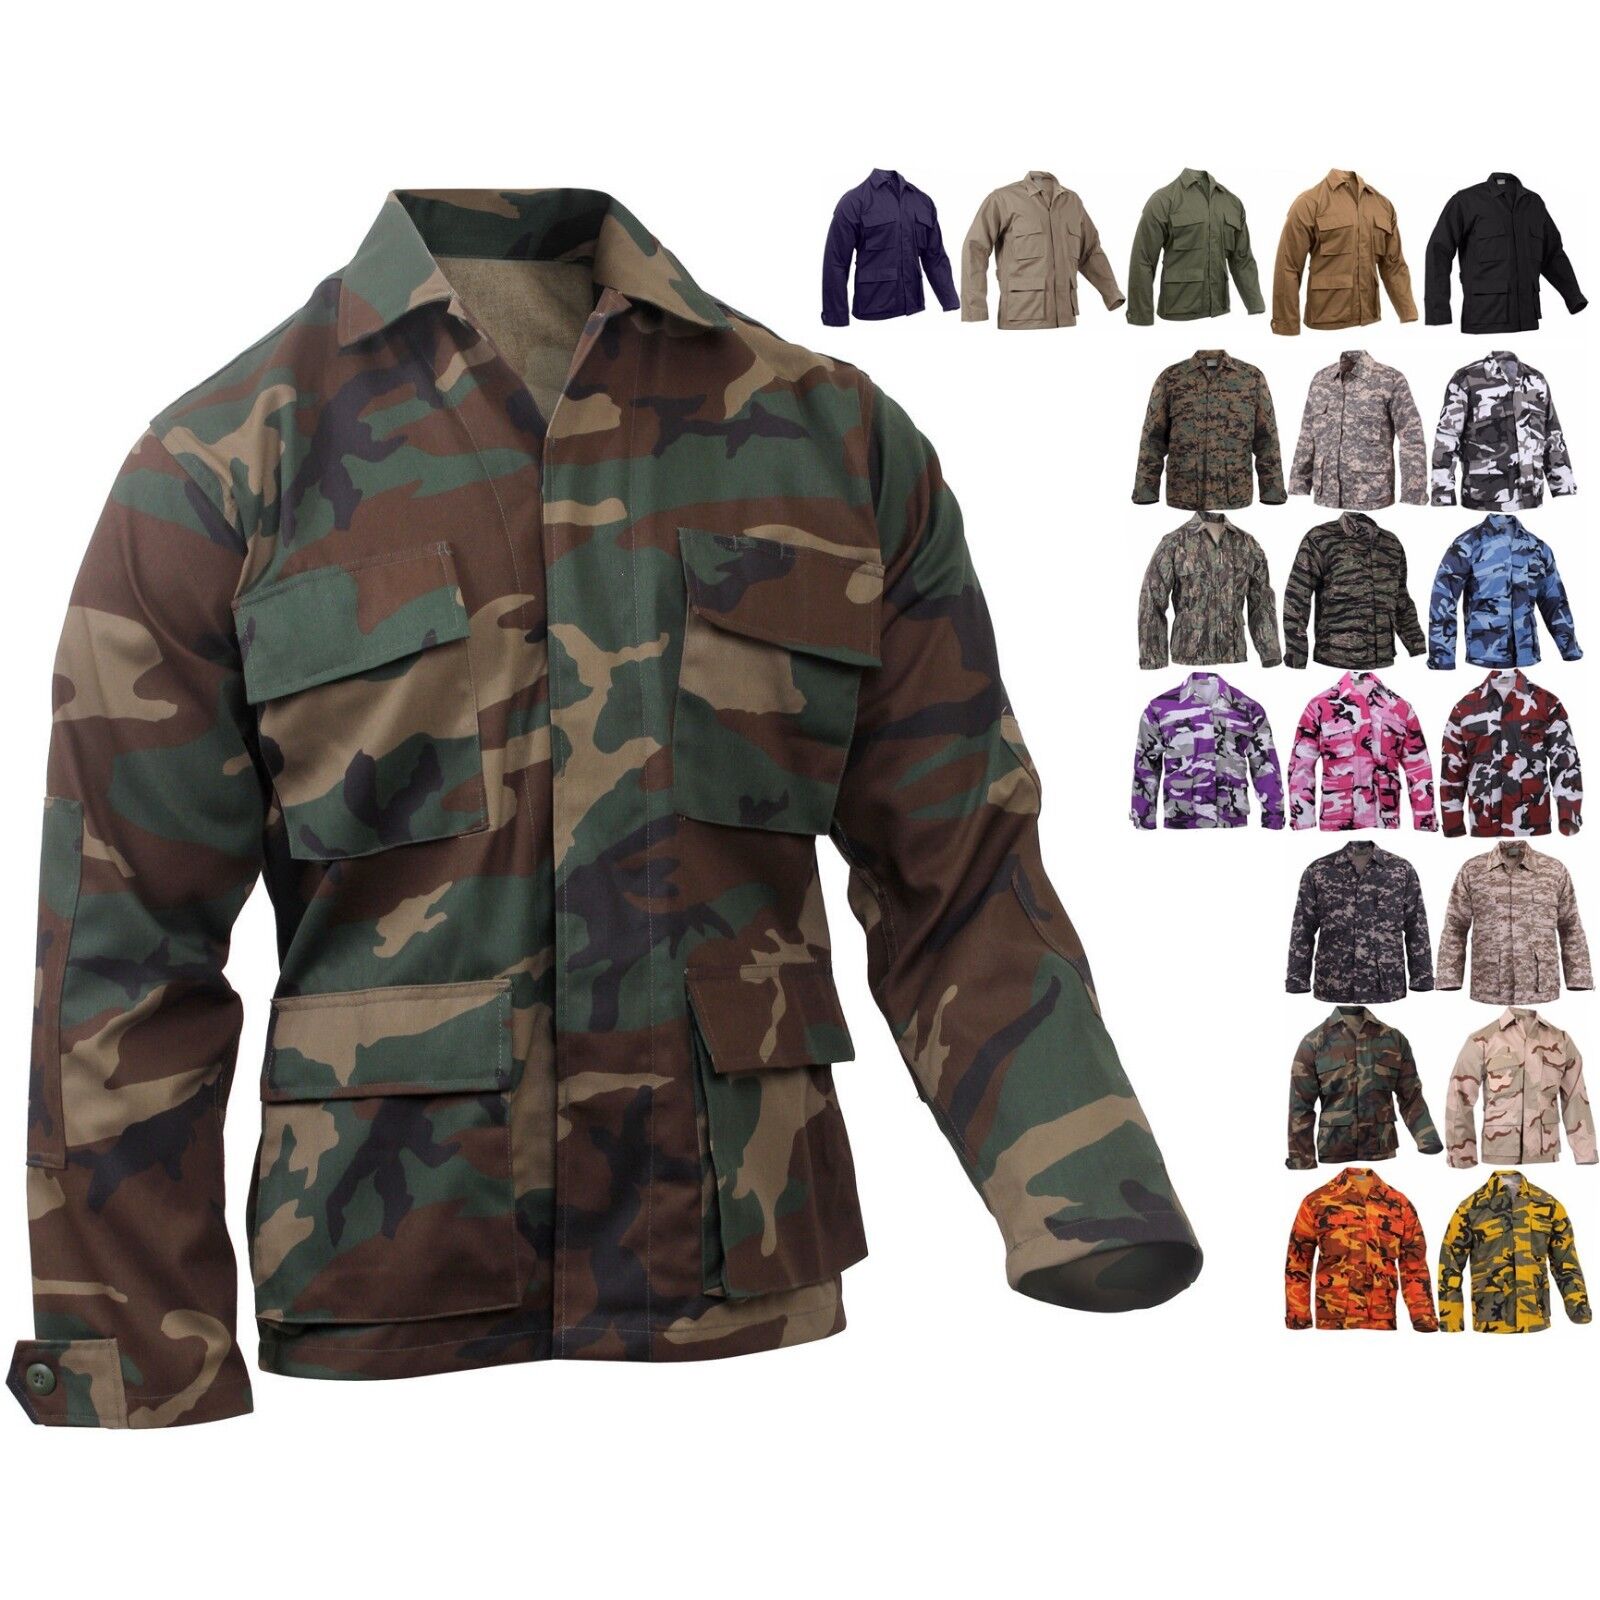 BDU Shirt Tactical Military Uniform Army Coat Camouflage Arm